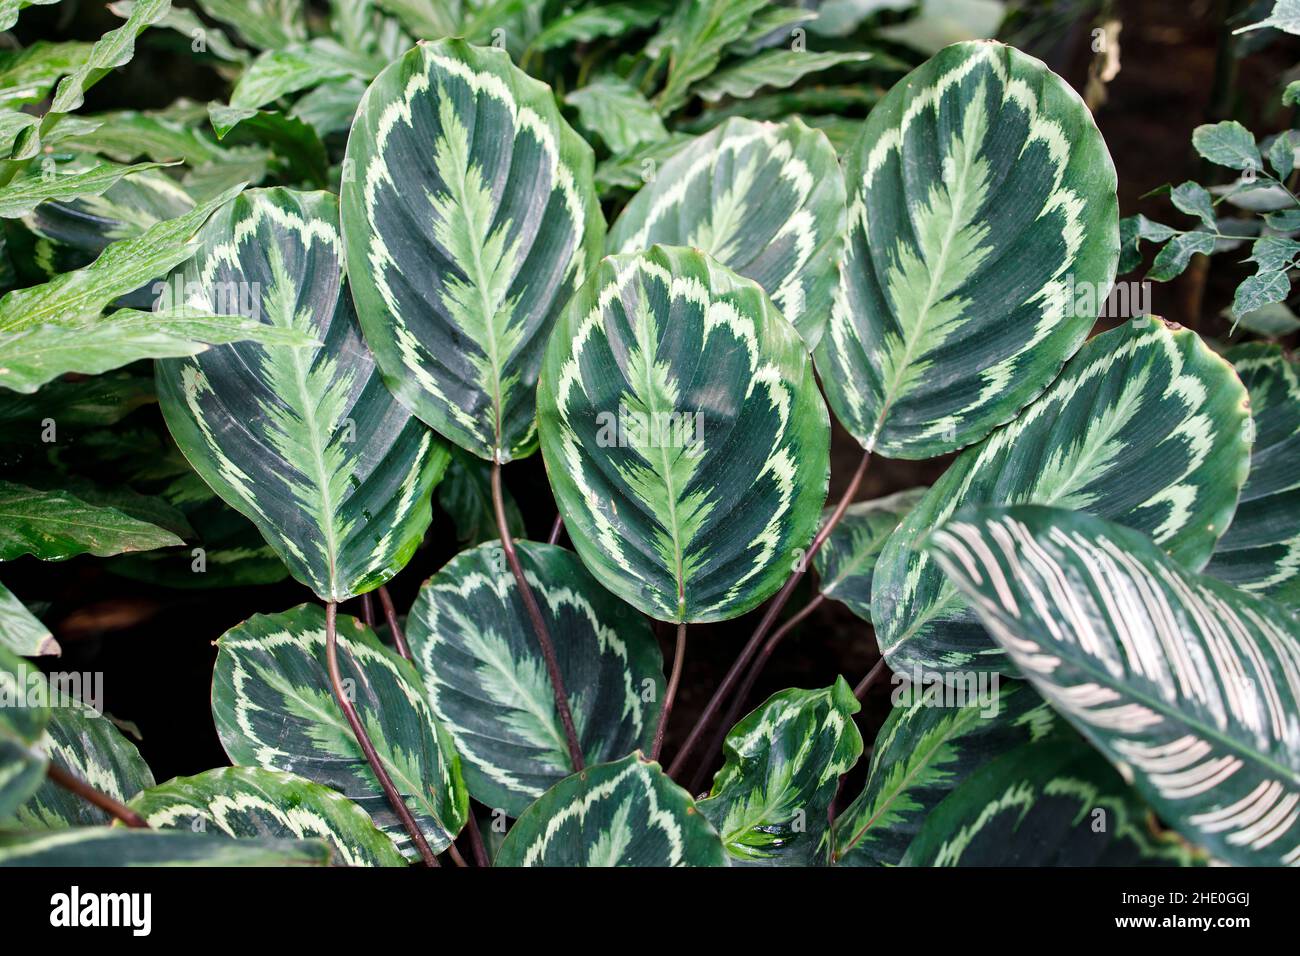 Calathea roseopicta, the rose-painted calathea, is a species of plant in the family Marantaceae, native to northwest Brazil. Stock Photo